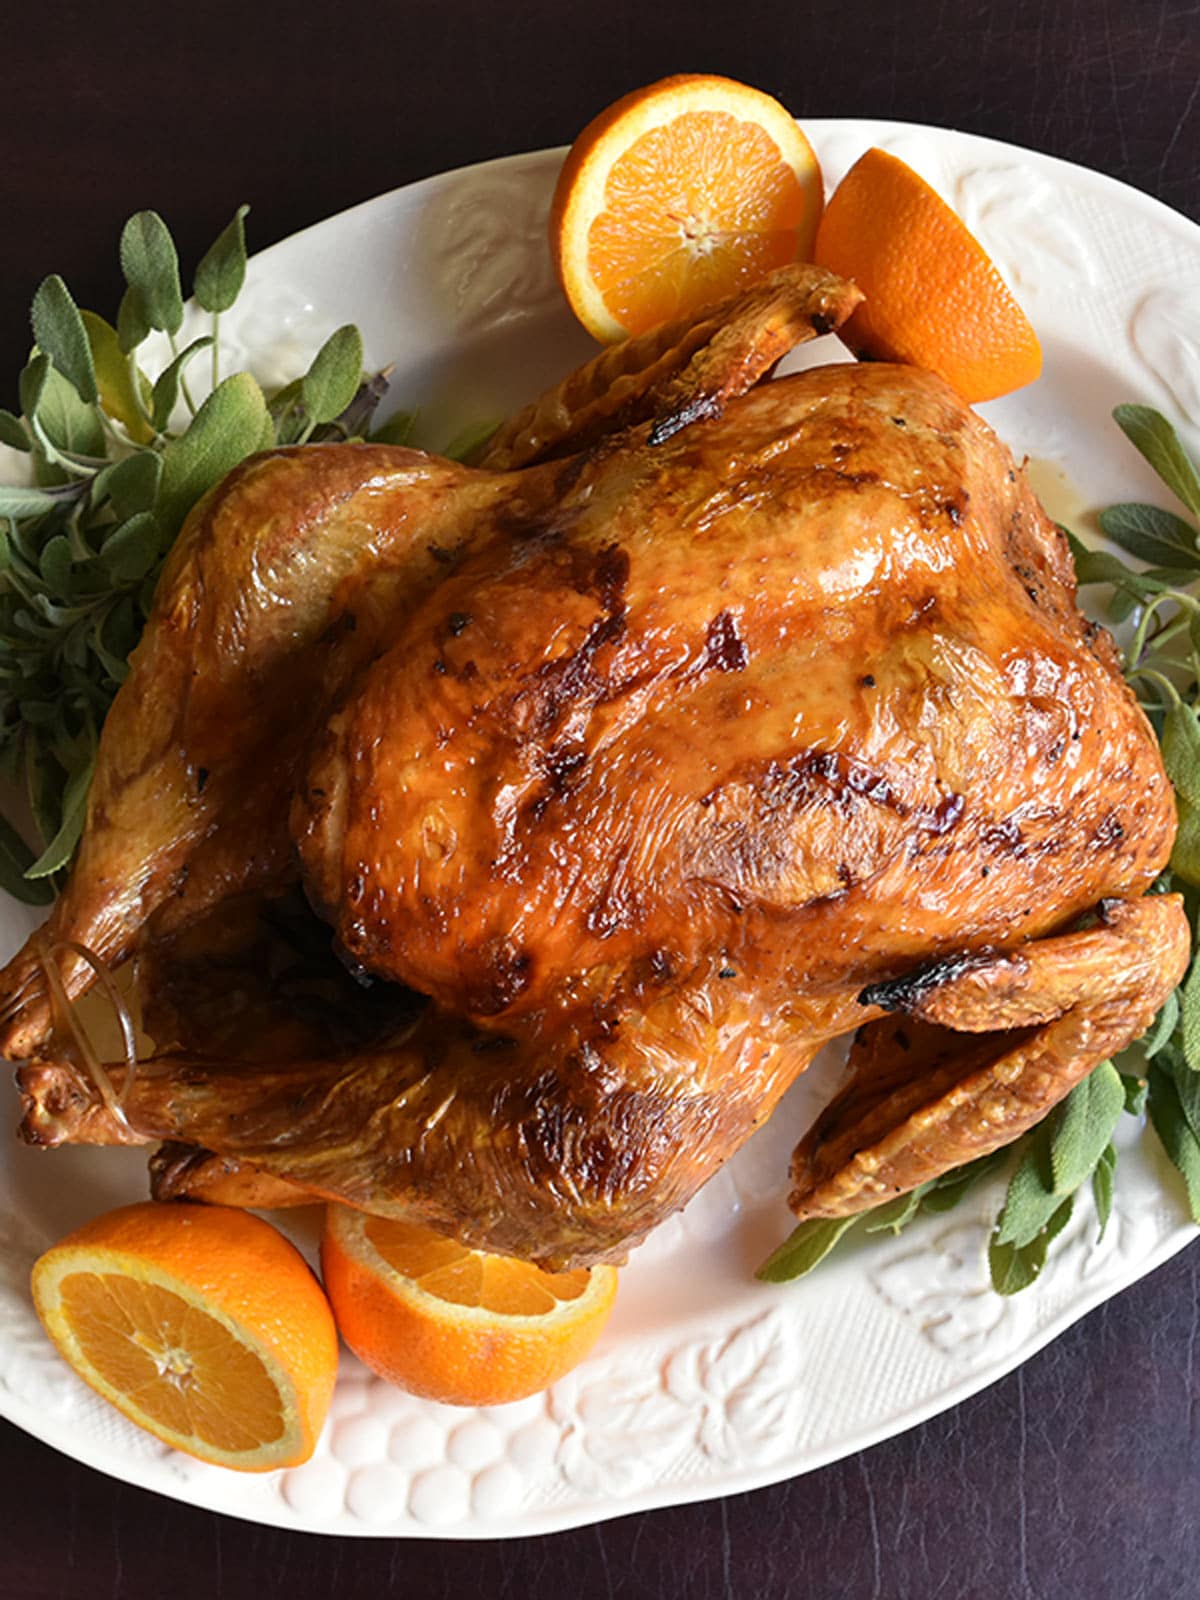 Top down view of golden brown roasted turkey on white platter with sage and orange garnish.